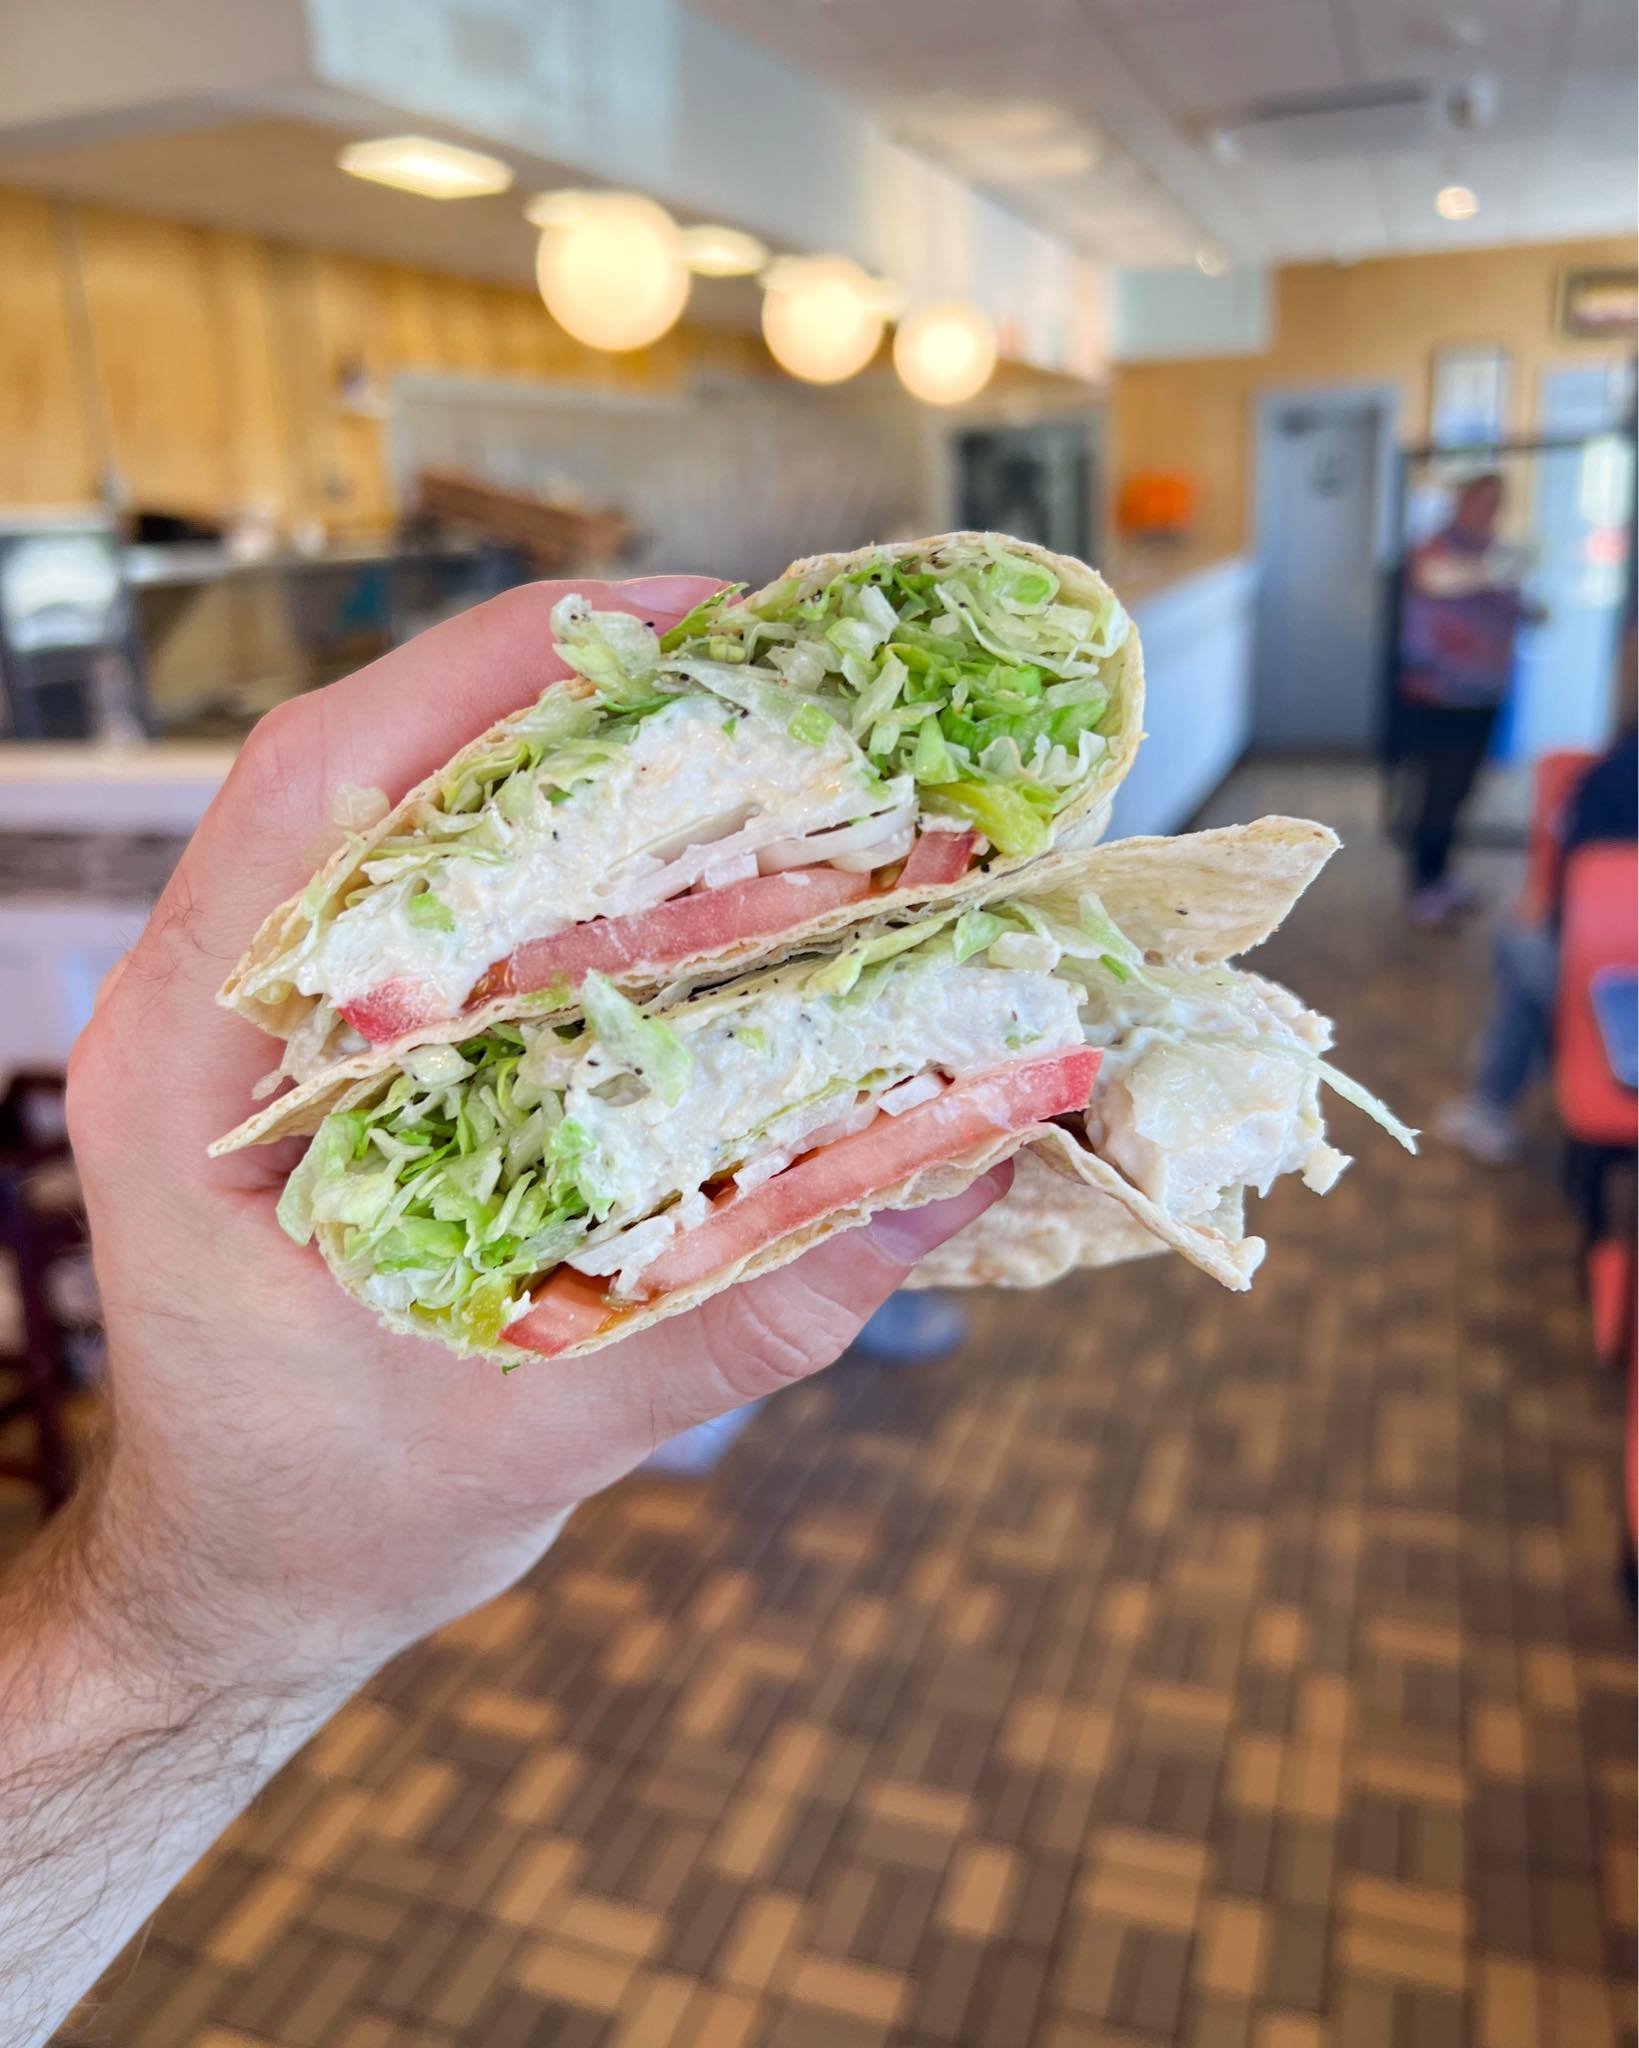 Dont forget any sub roll can be swapped out for a low carb flatbread! Perfect for a light lunch on the go! 😎🤤

#lowcarb #subshop #riccottis #bristol #rhodeisland #lunchnearme #sandwich